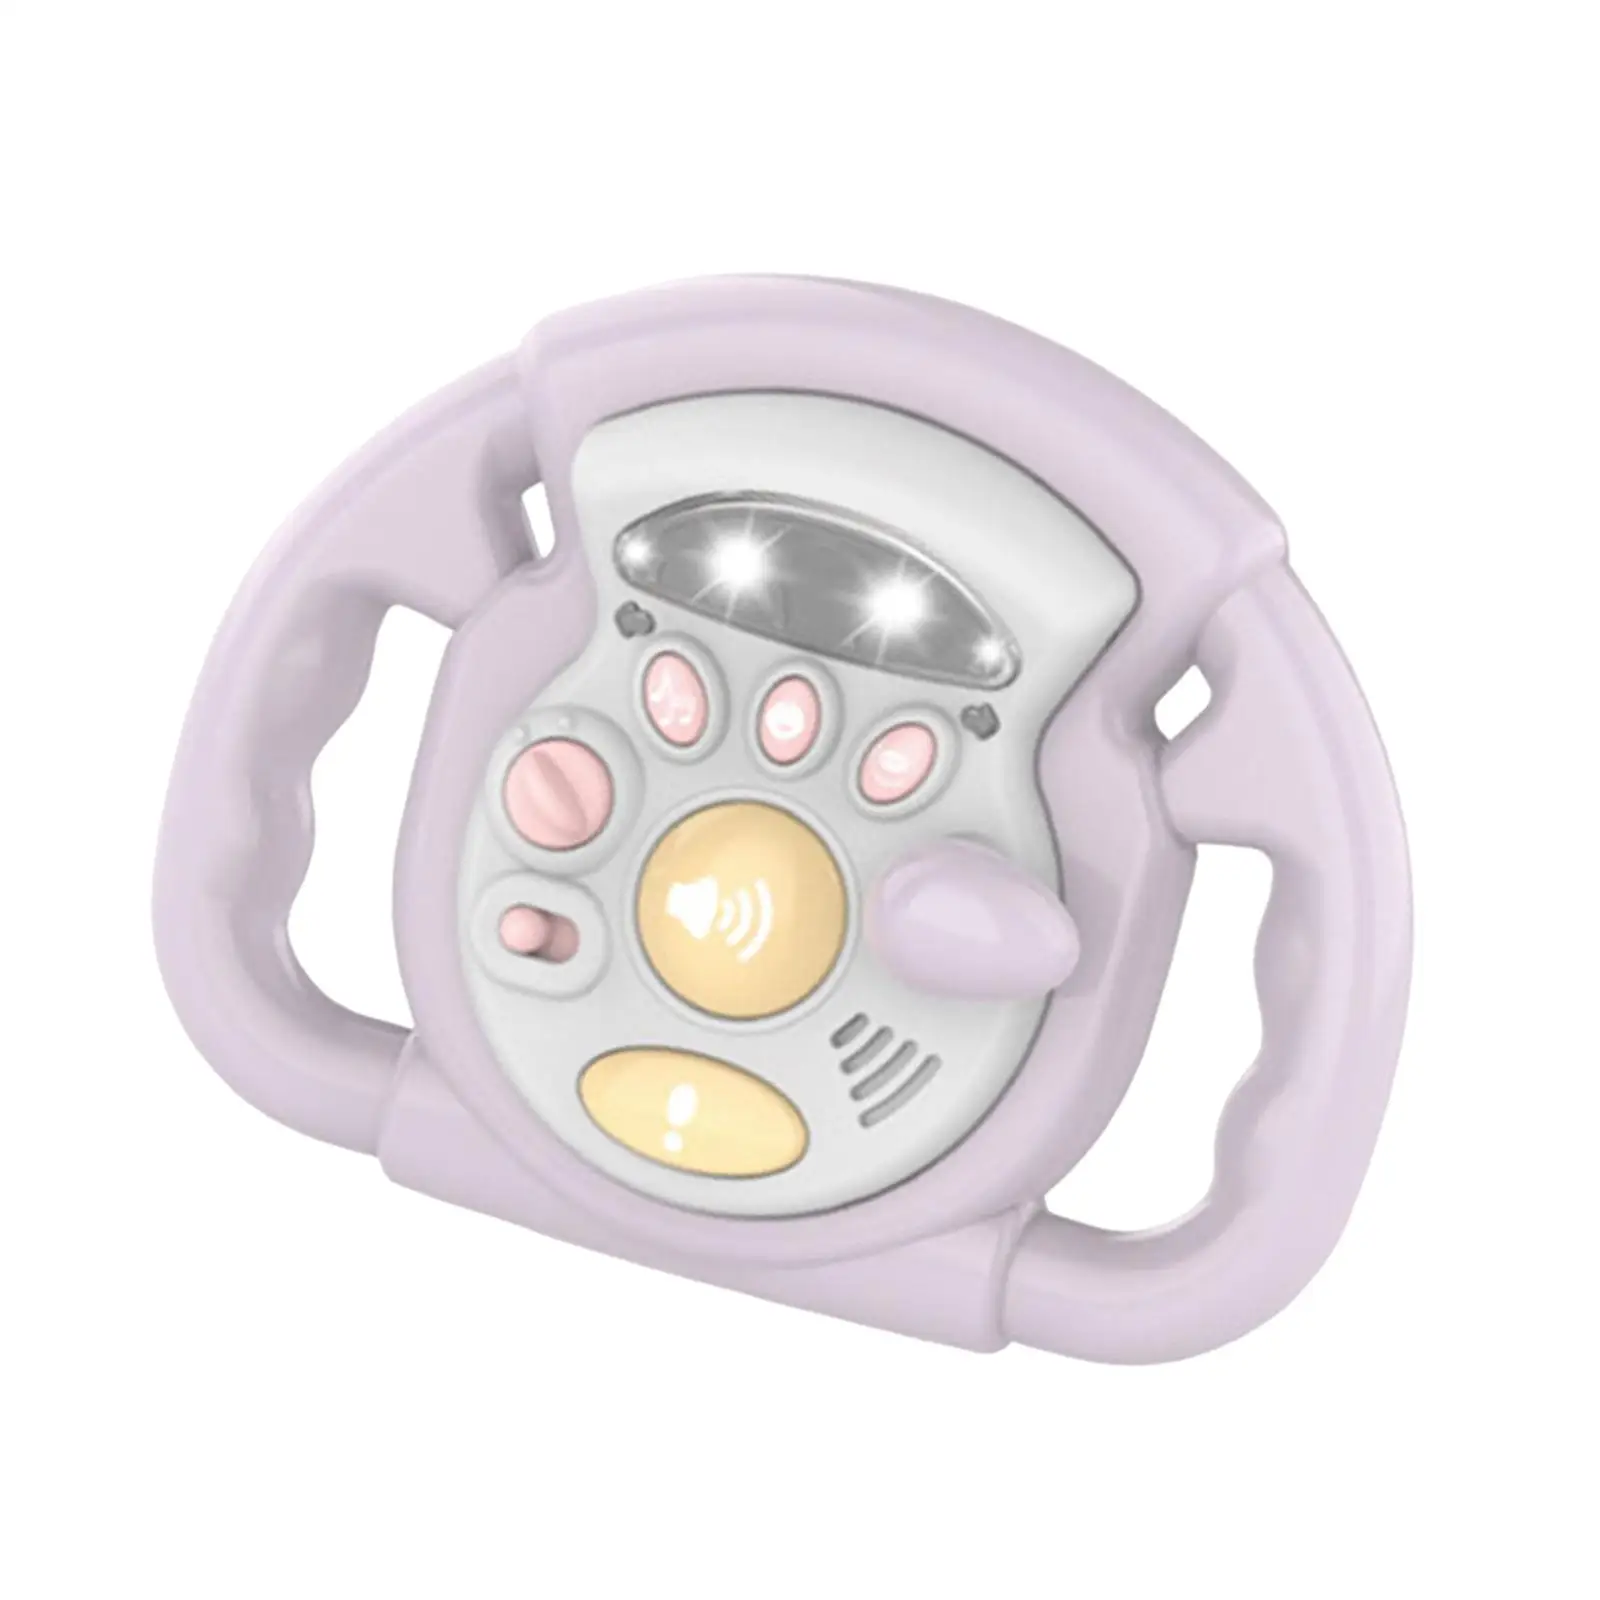 Multifunction Steering Wheel Toys with Light and Music 360 Rotation Driving Controller for Kids Education Toy Interactive Toy